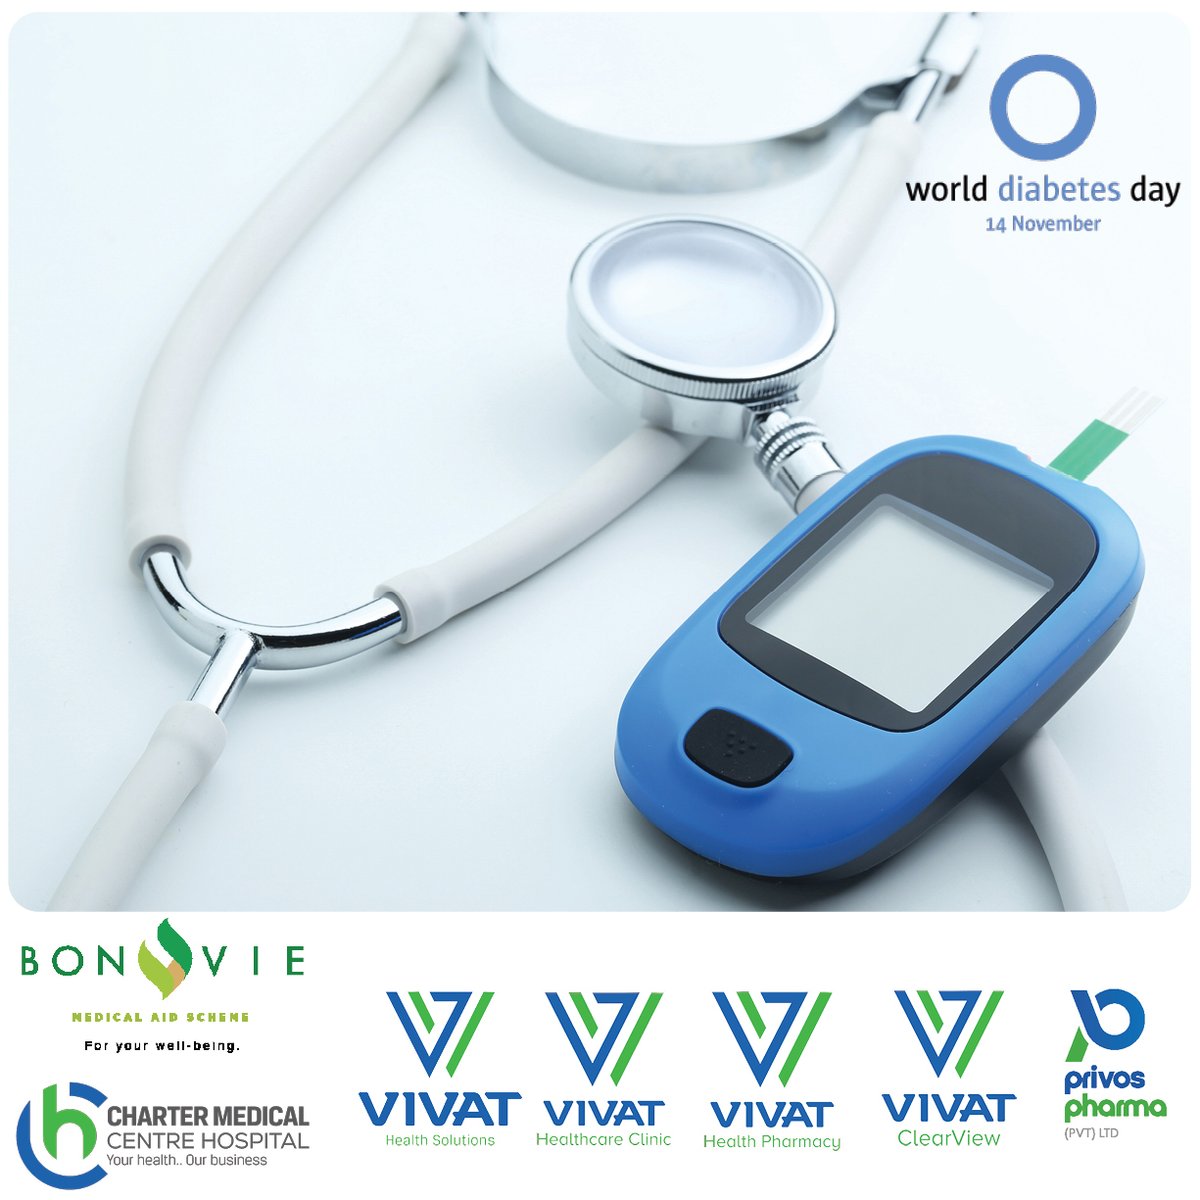 #WorldDiabetesDay2023
With 1 in 10 adults worldwide having diabetes, #diabetes has emerged as a global health issue. As Vivat Health Solutions, we commemorate this day by calling for Access to Diabetes Care for all.

#WorldDiabetesDay #QualityHealthCareRedefined #foryourwellbeing